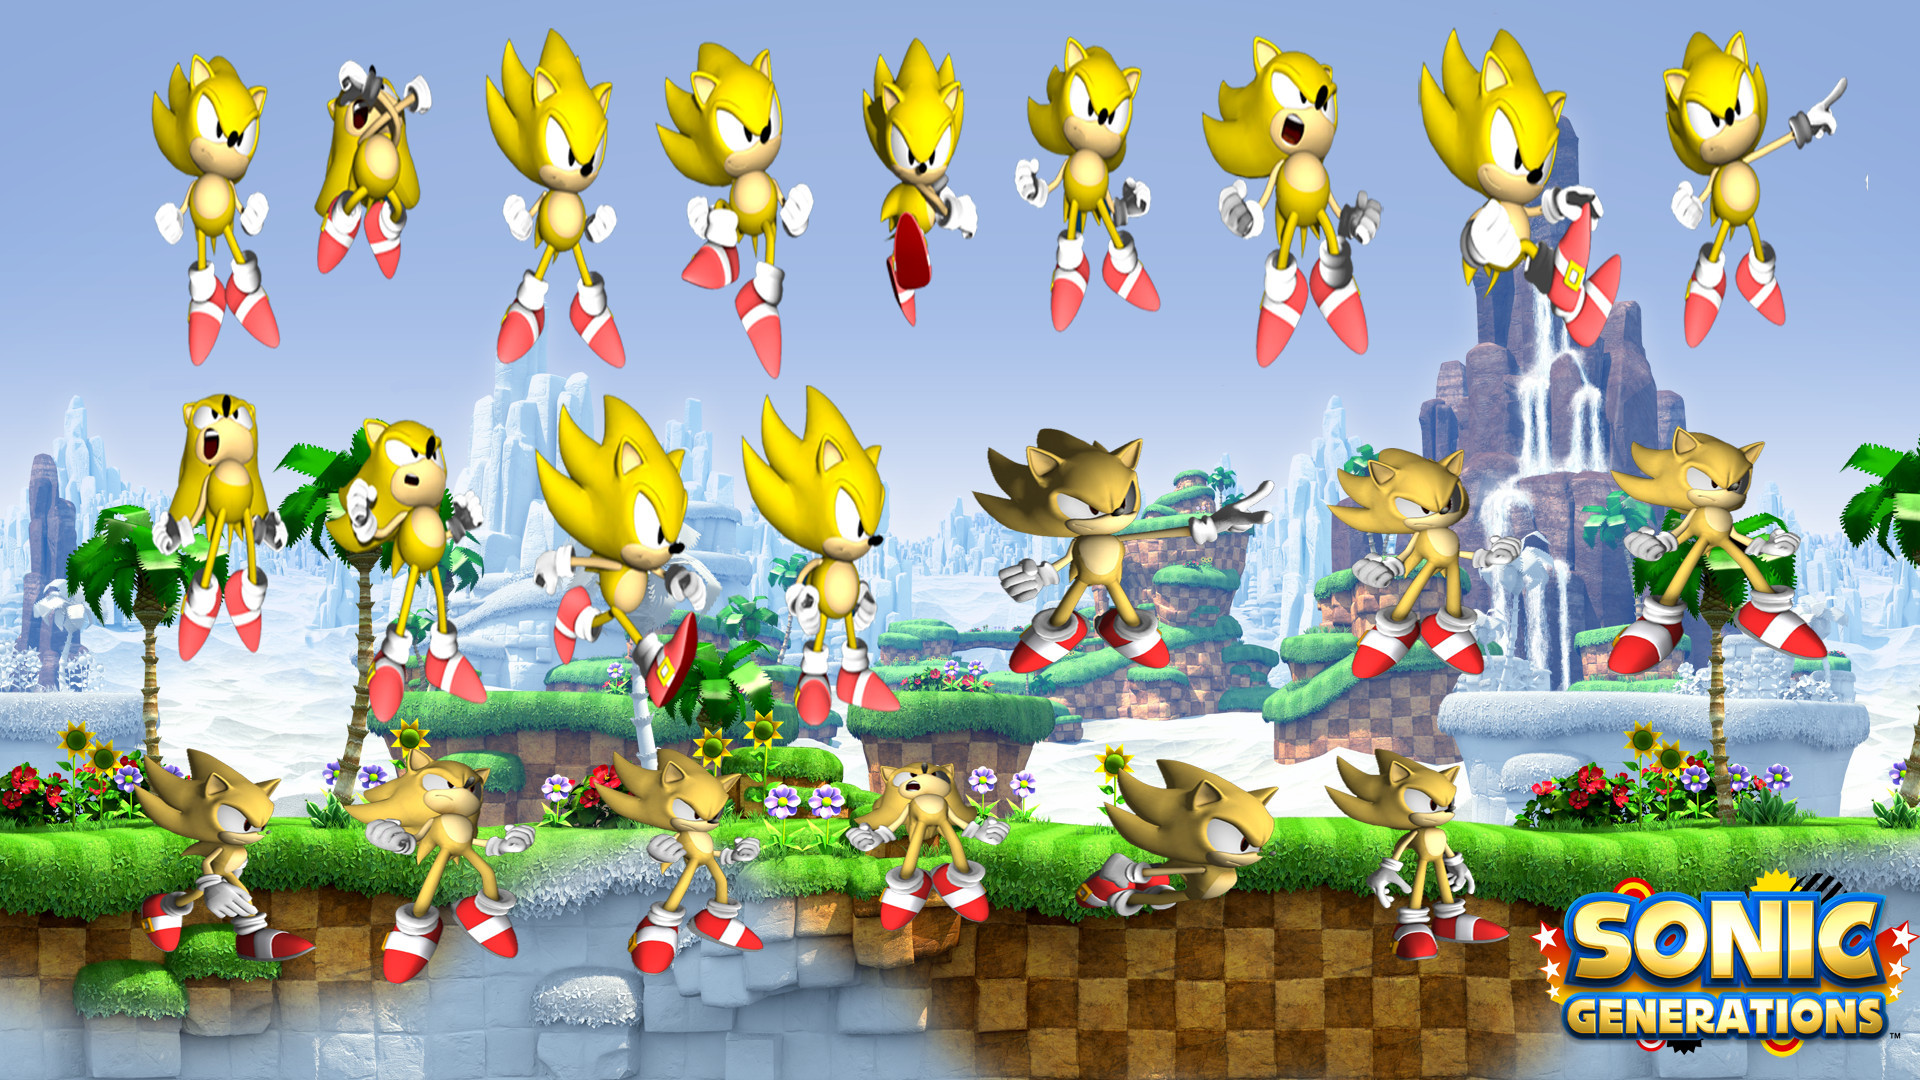 1920x1080 SONIC GENERATIONS WALLPAPER 12 by SONICX2011 SONIC GENERATIONS WALLPAPER 12  by SONICX2011